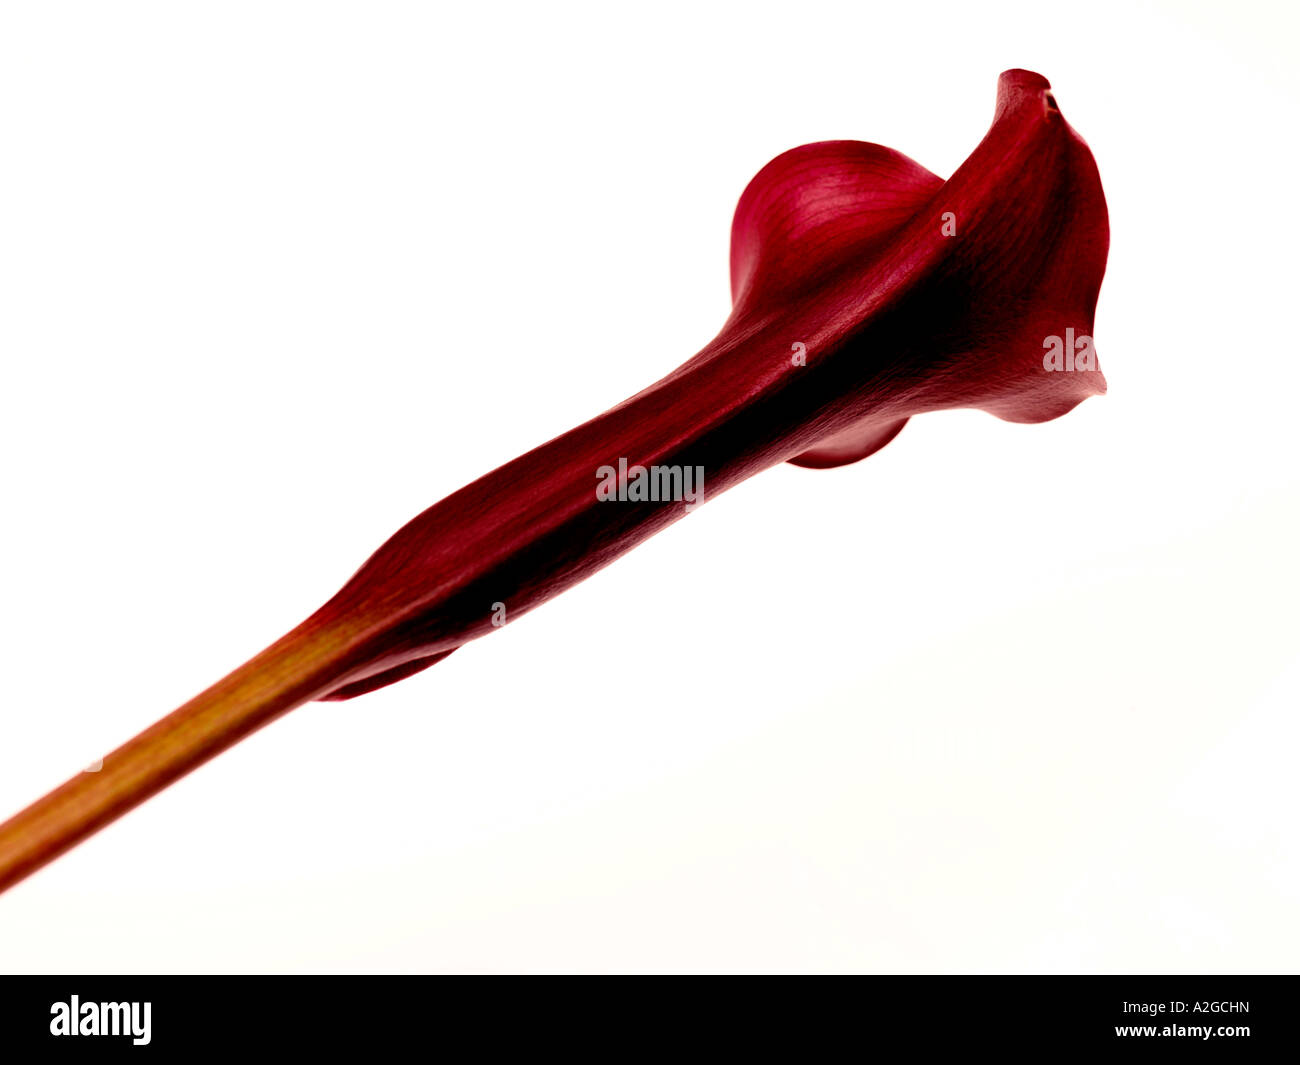 Single Zantedeschia Flower Bloom Isolated Against A White Background With No People And A Clipping Path Stock Photo